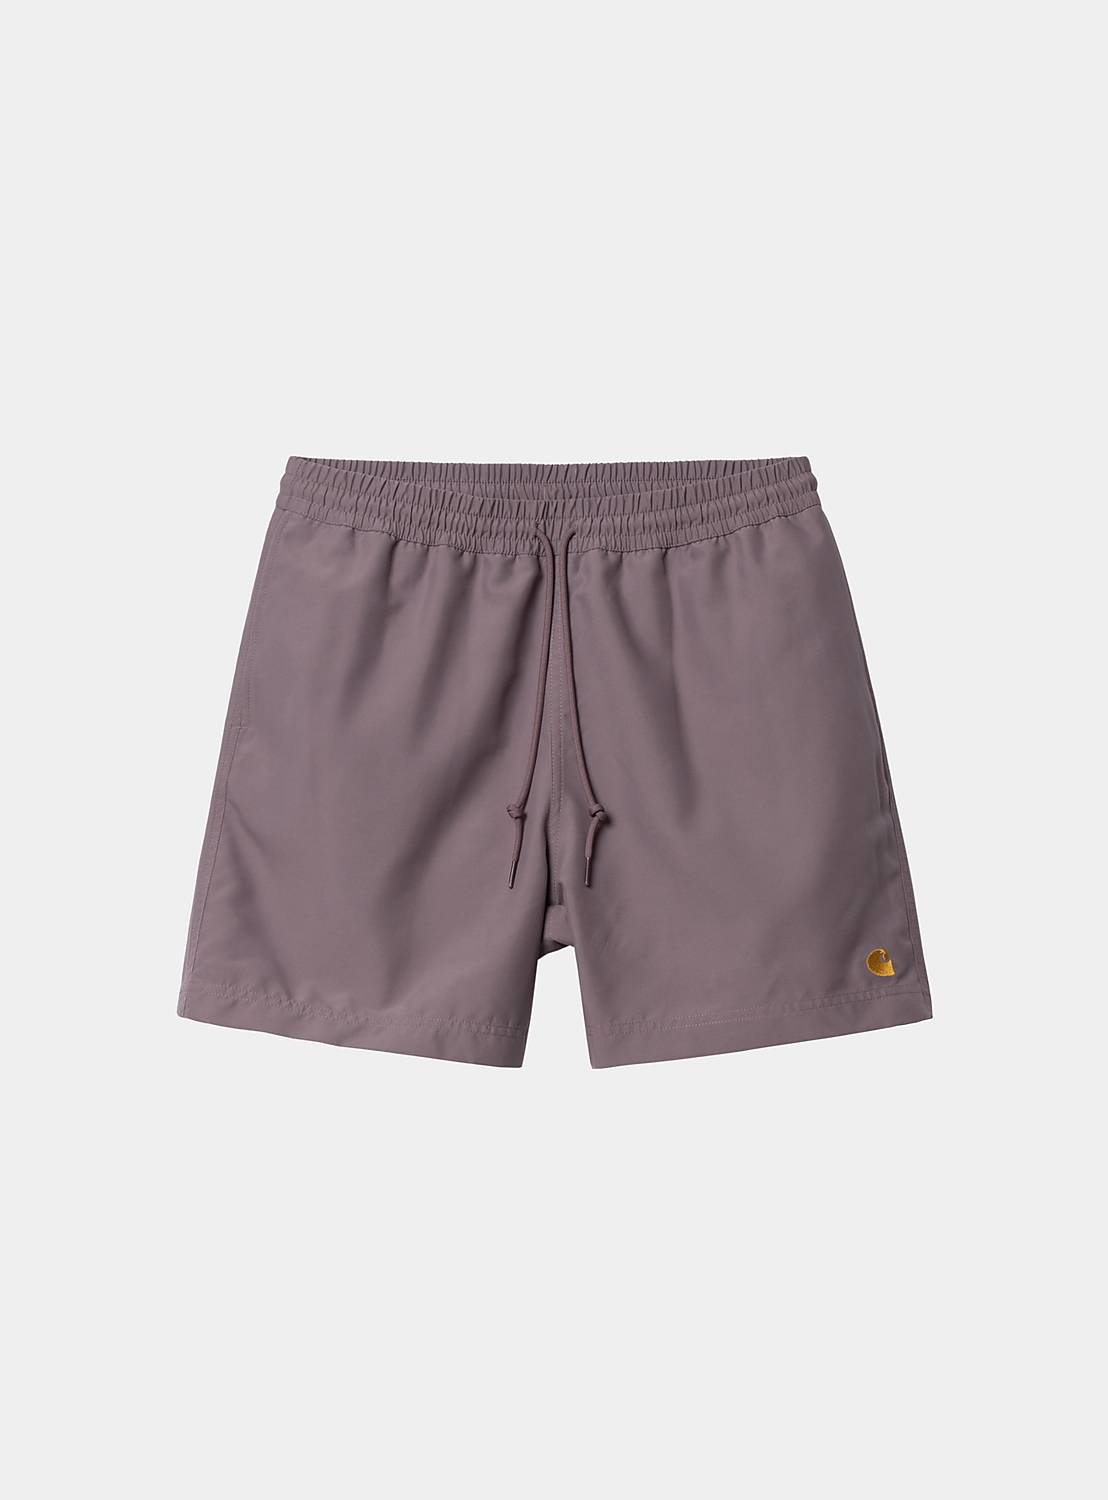 Carhartt WIP Core Products